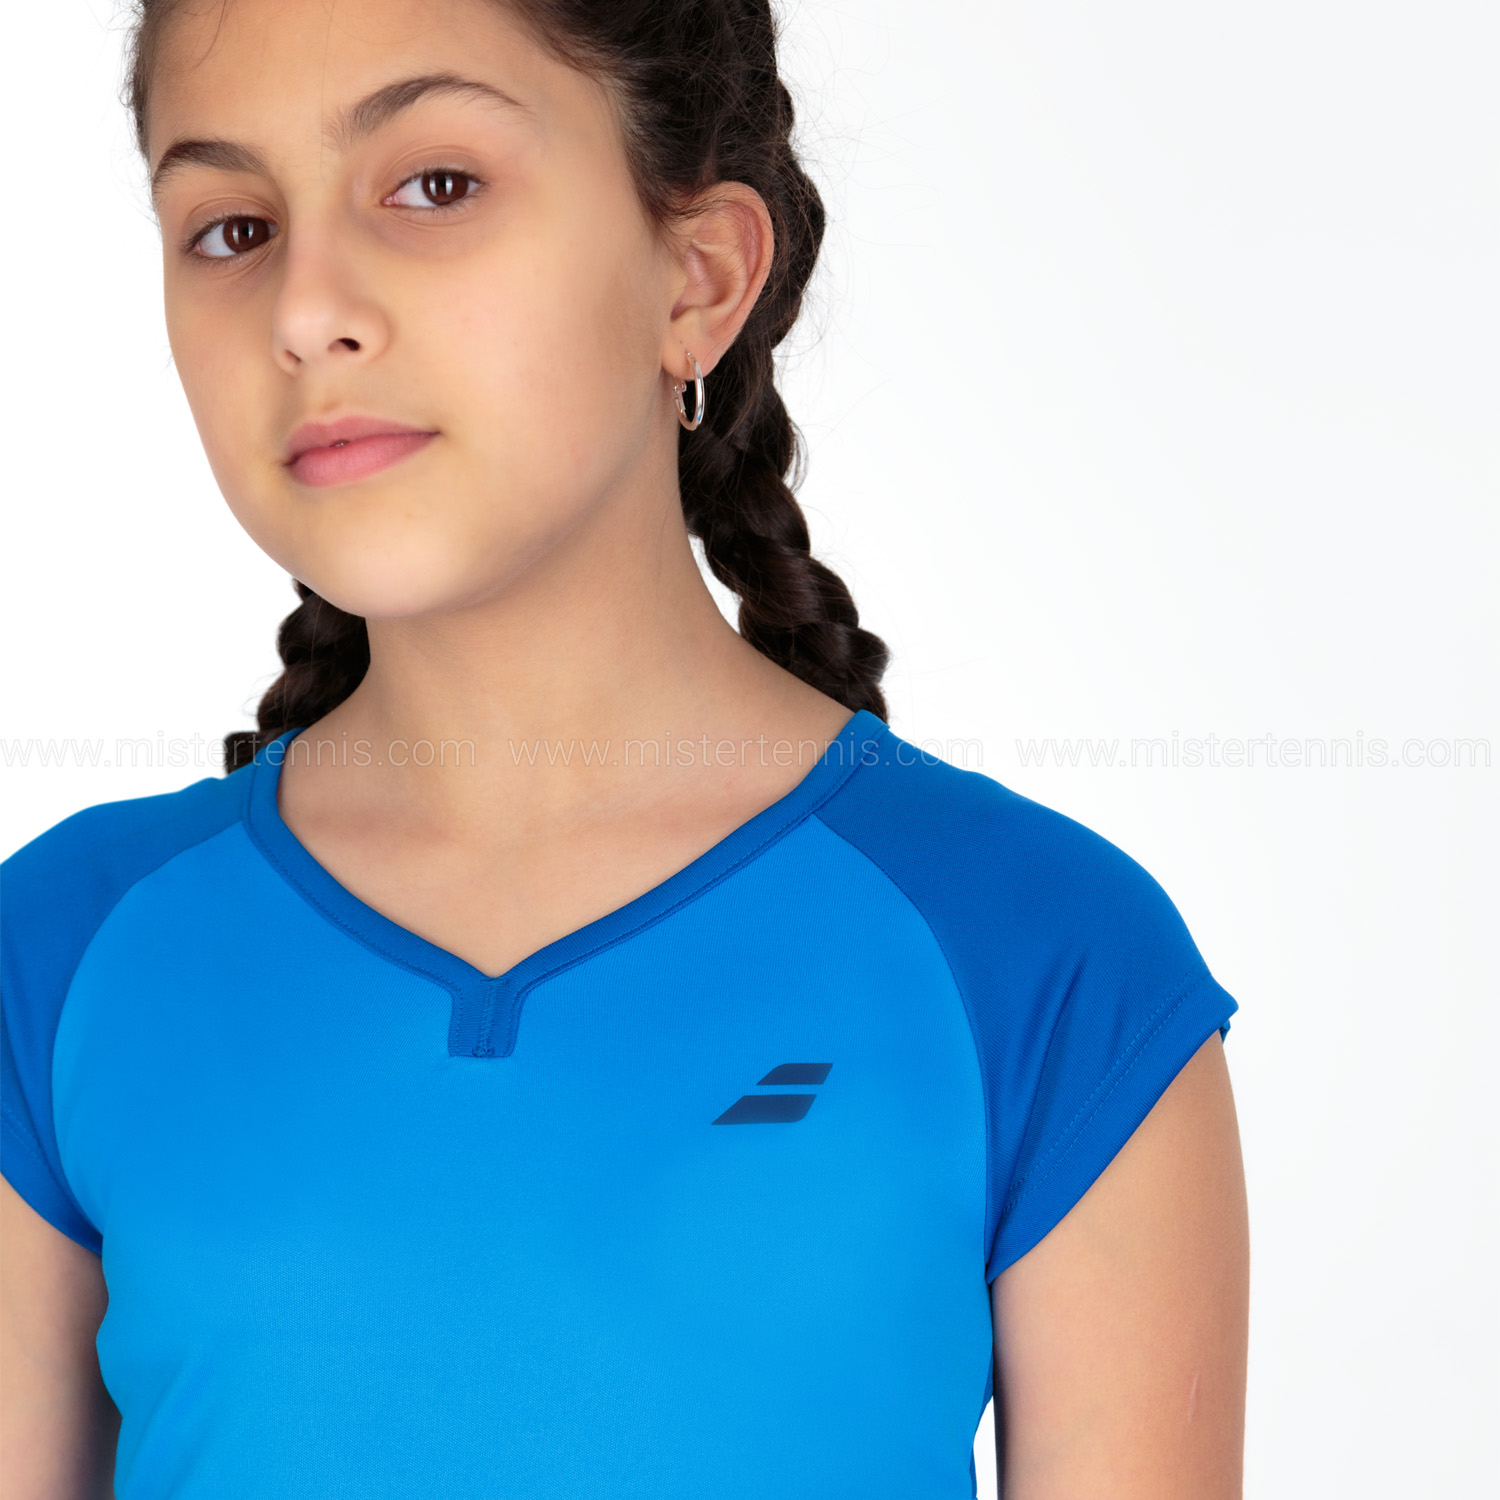 Blue Aster Babolat Girl's Play Cap Sleeve Tennis Tee US Youth Size 8-10 